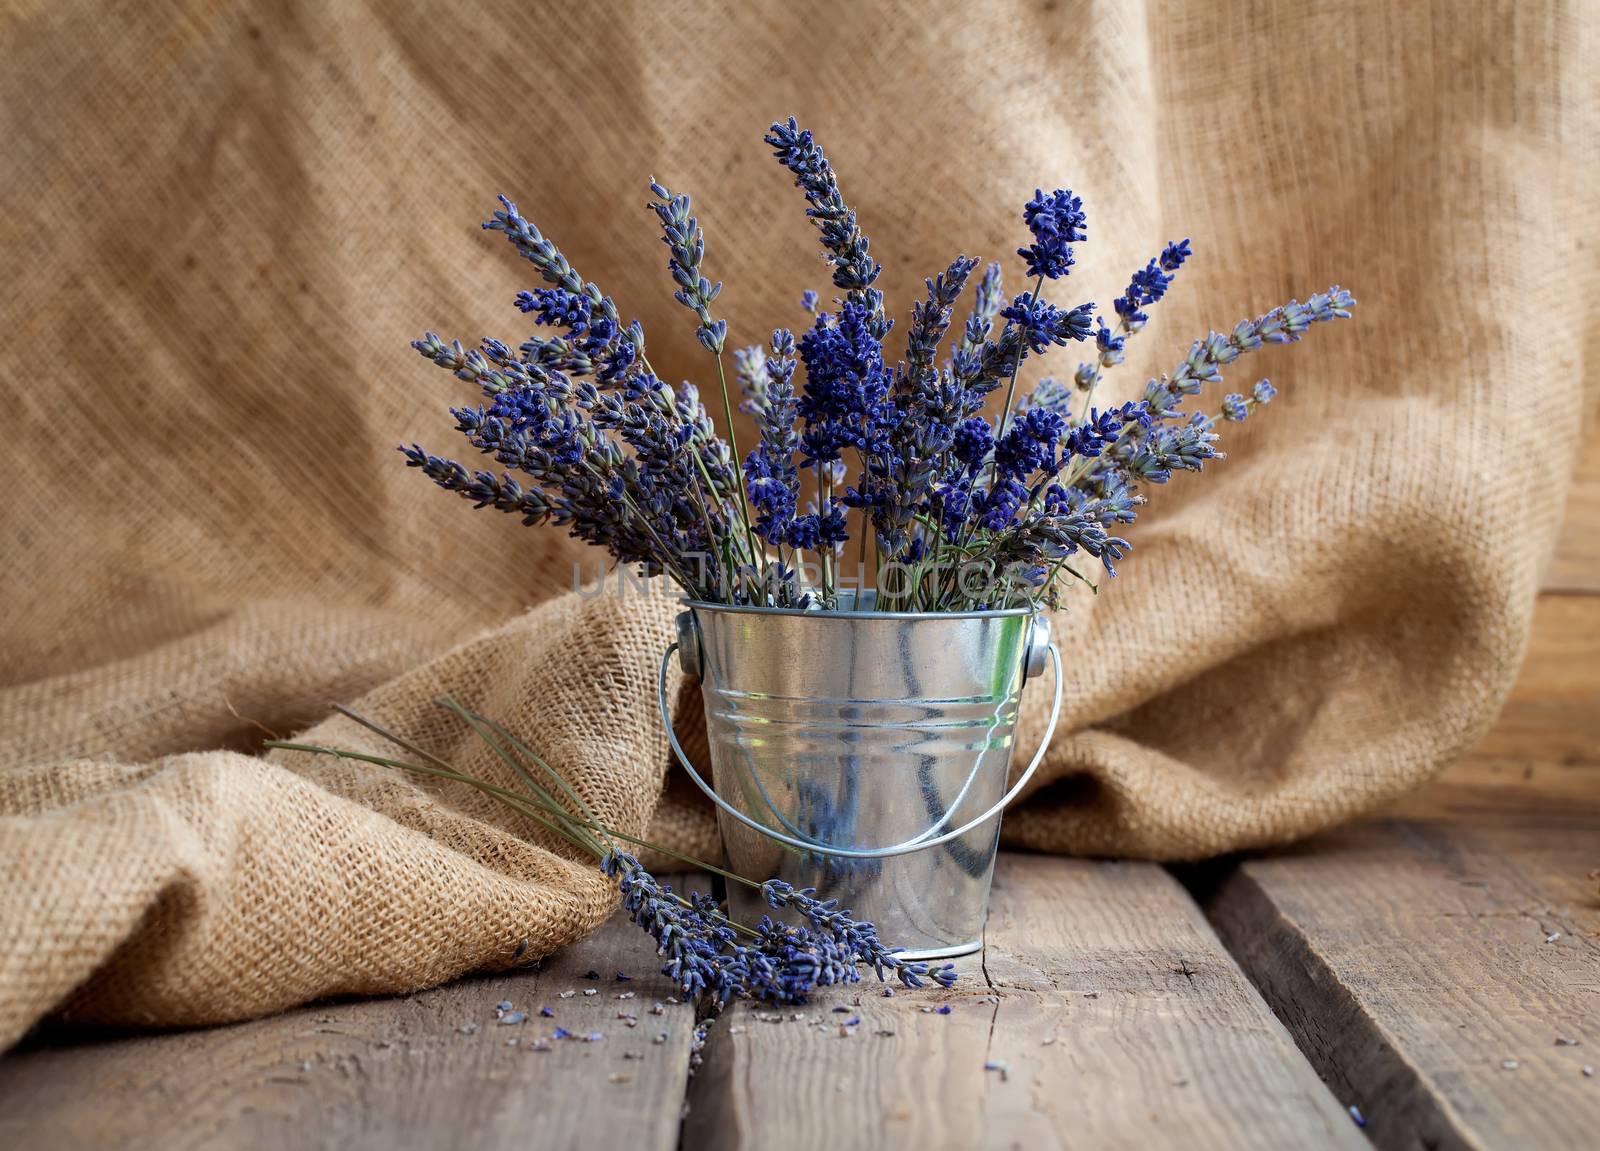 Lavender flowers in an iron bucket on a wooden background by motorolka